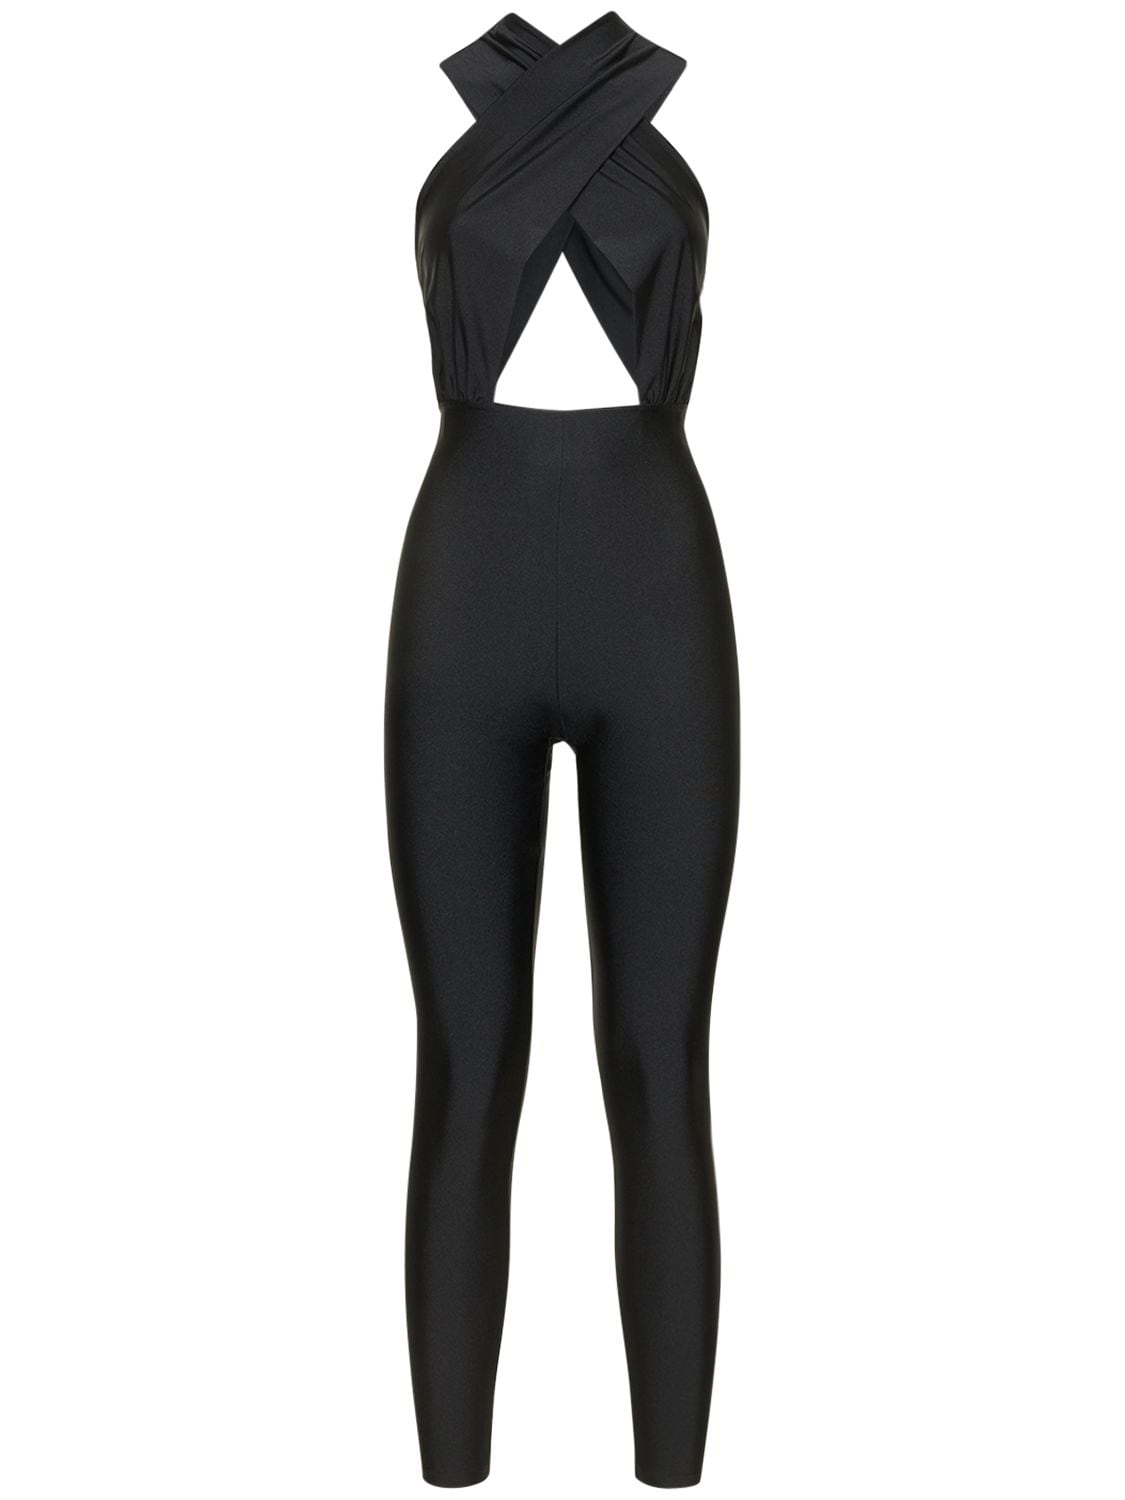 Hola Shiny Stretch Lycra Jumpsuit – WOMEN > CLOTHING > JUMPSUITS & ROMPERS